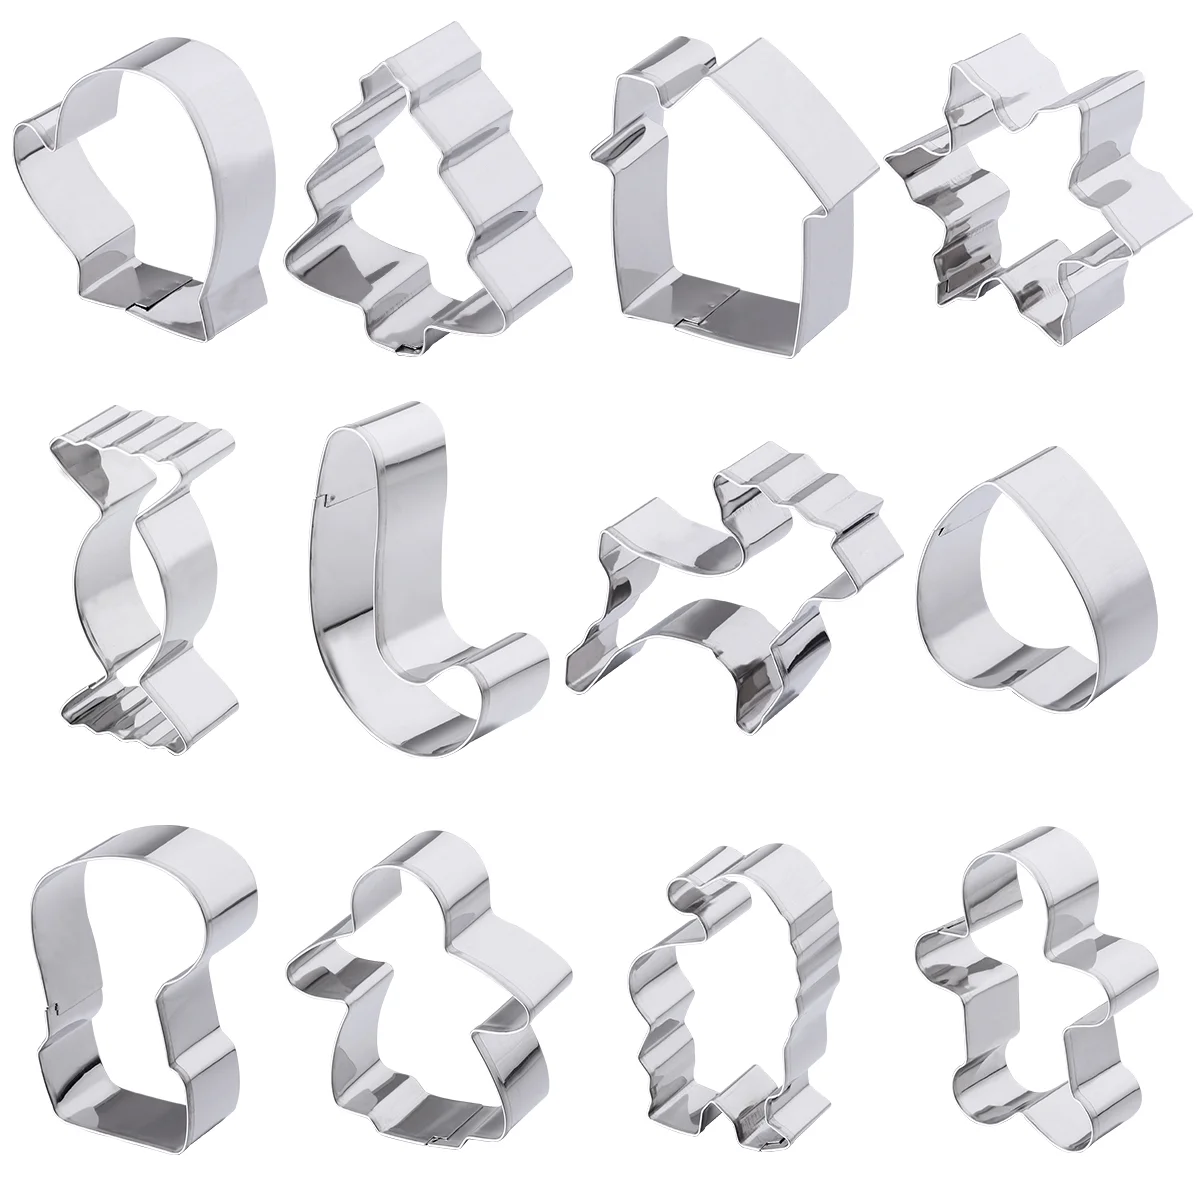 

Christmas Cookie Cutters 12Pcs Holiday Cutter Set Stainless Steel Metal Gingerbread Men Christmas Tree Snowflake Candy Cane